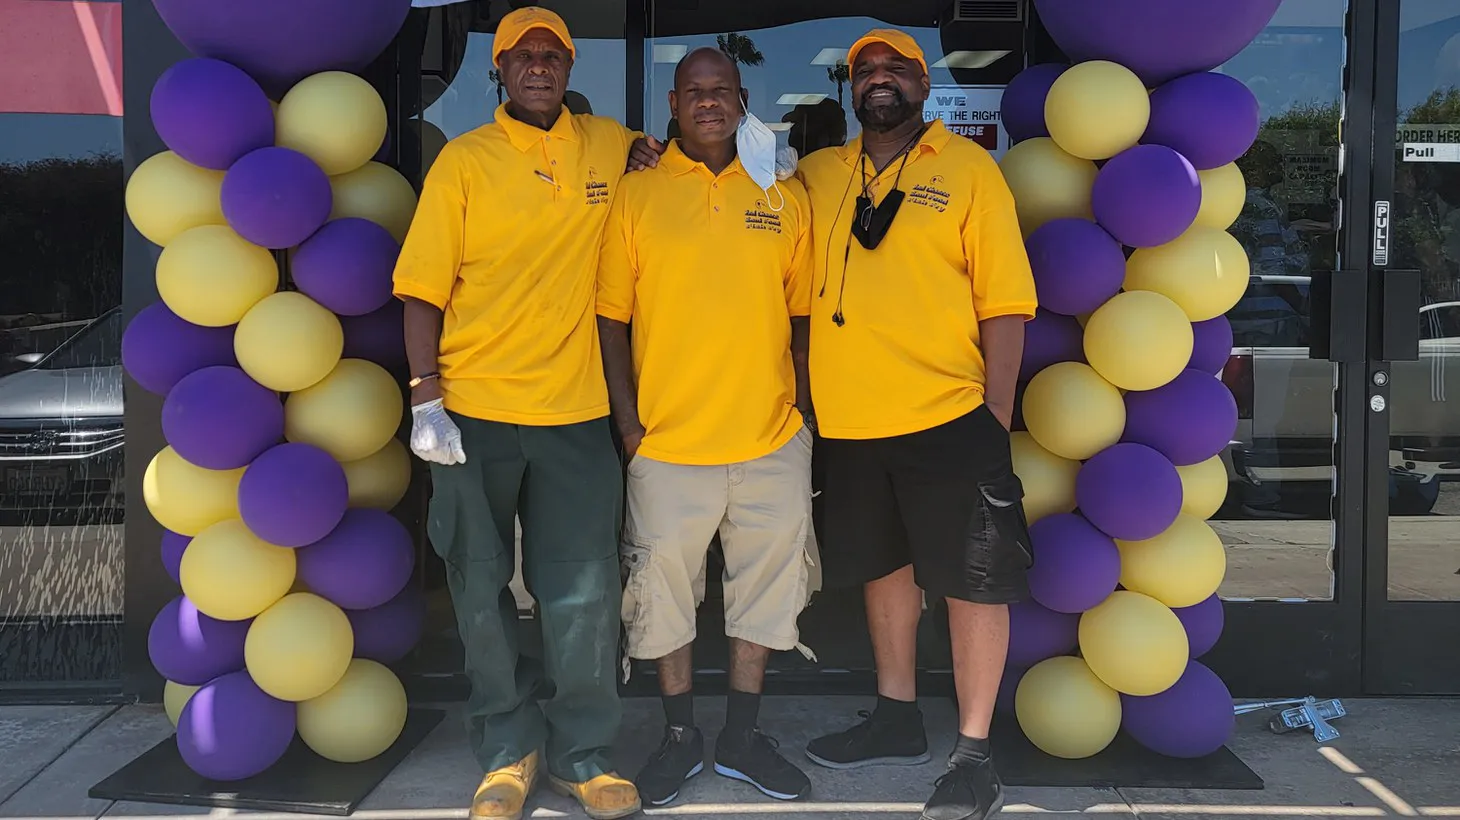 From left to right) Owners Johnny Smith, Dion Corsey, and Ray Ford at the grand opening of 2nd Chance Soul Food Fish Fry.